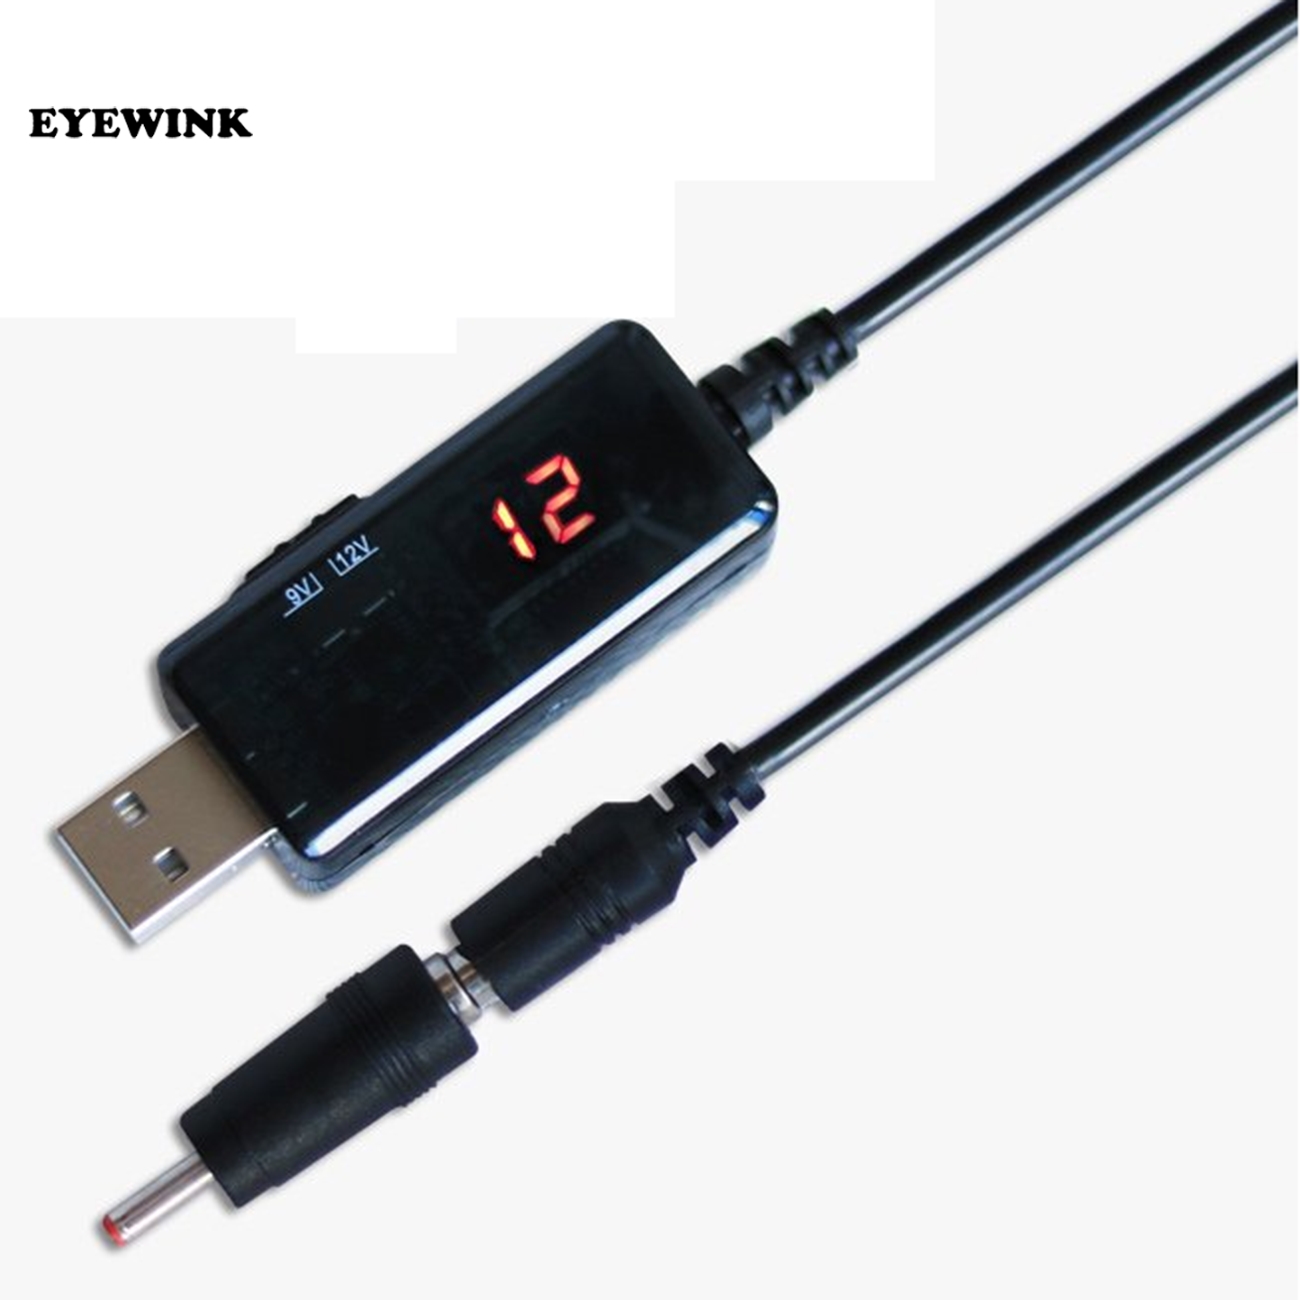 USB to DC Convert Cable 5V to 12V Voltage Step-Up Cable 5.5*2.1mm DC Male 1M 